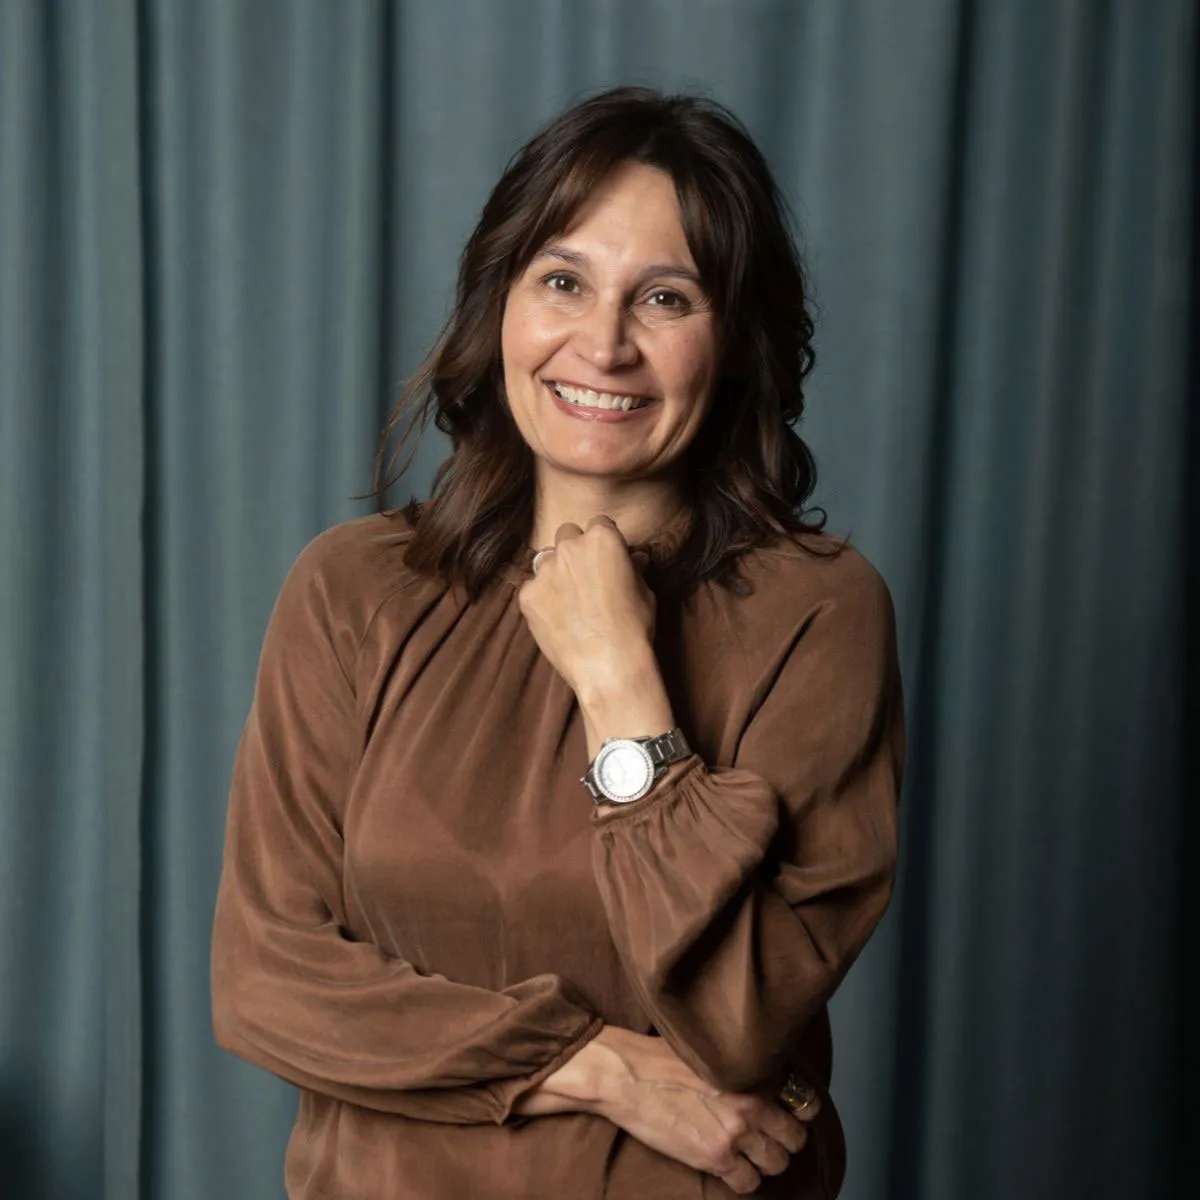 Lisa Newhouse smiling for a photo wearing a brown shirt in front of a grey curtain